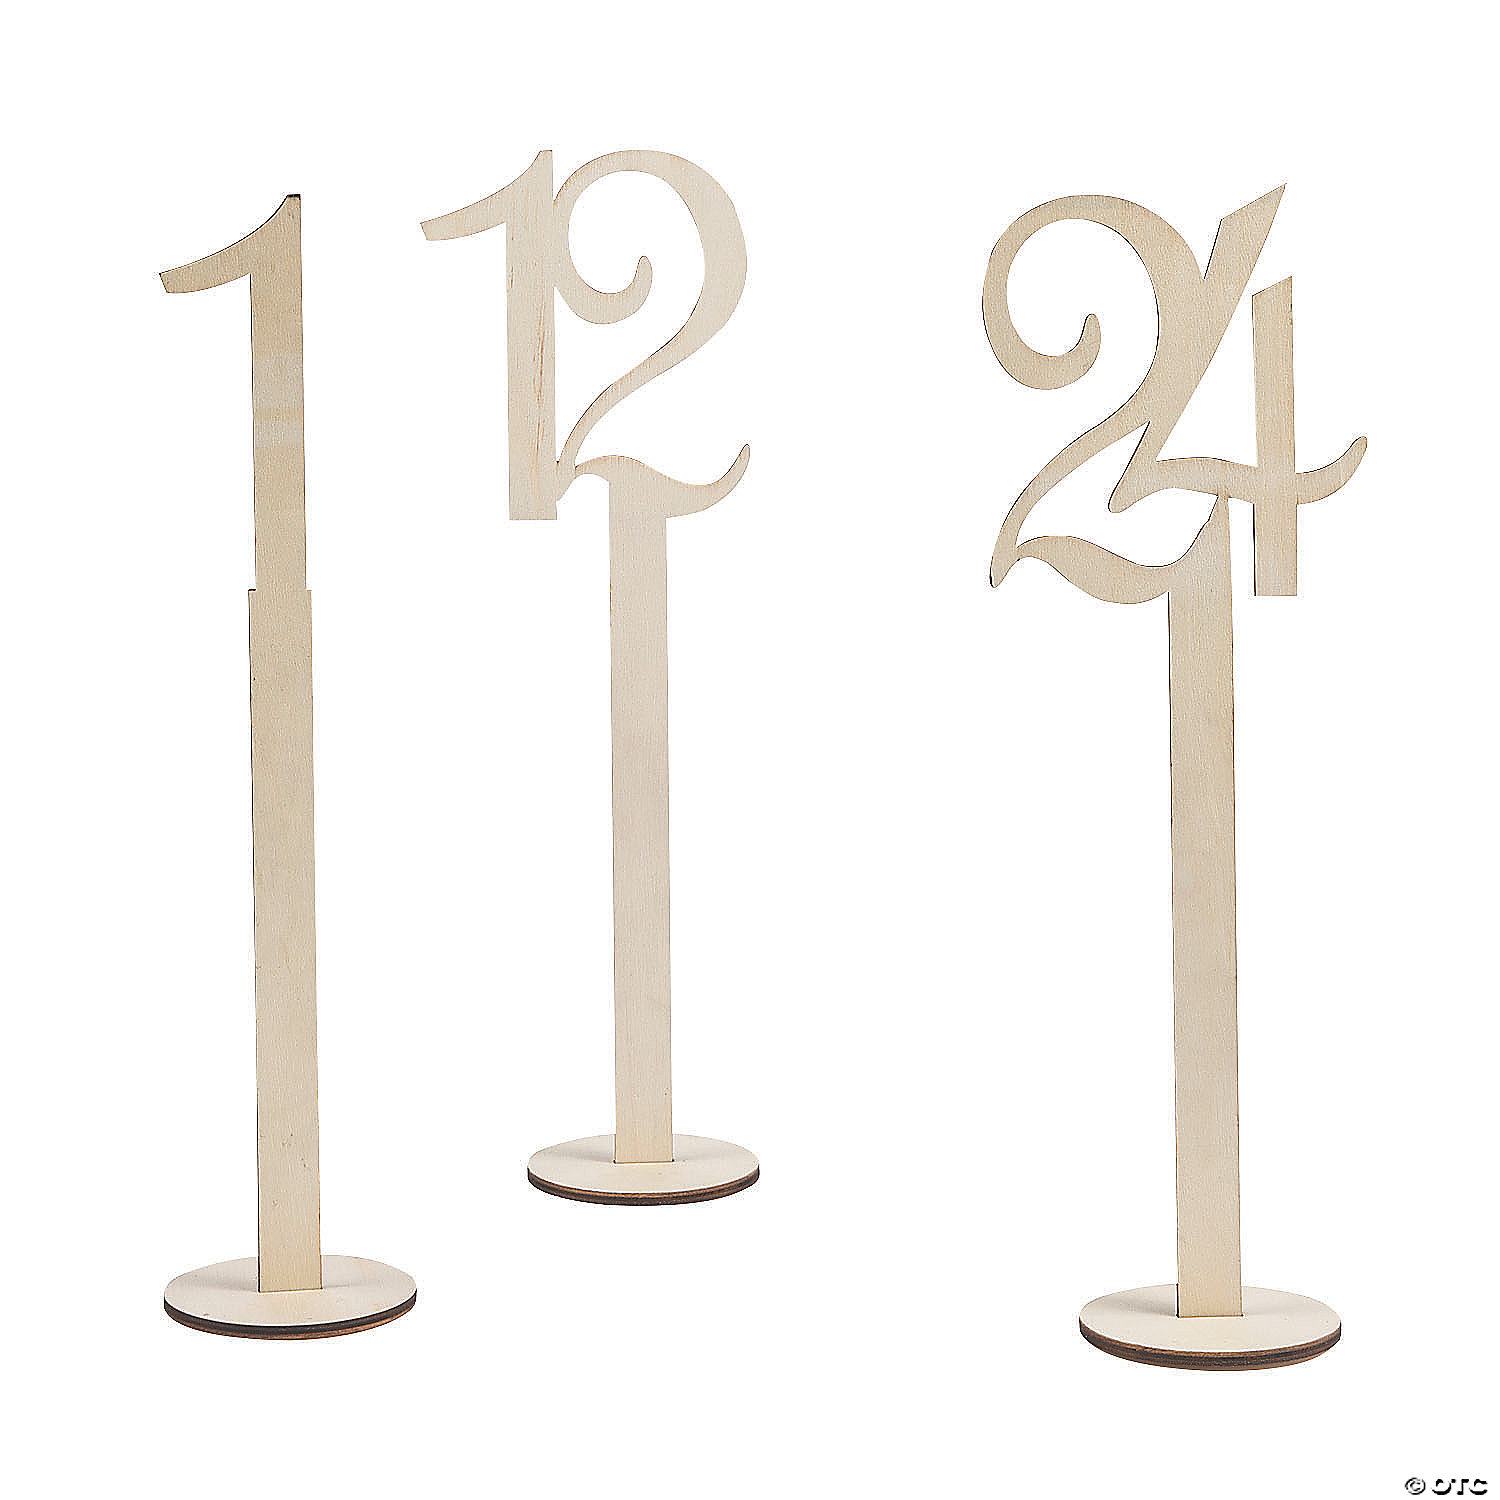 Wedding table decor Copper Black Table number Gold Wedding setting supplies Wedding table centerpieces Silver Table number sticks